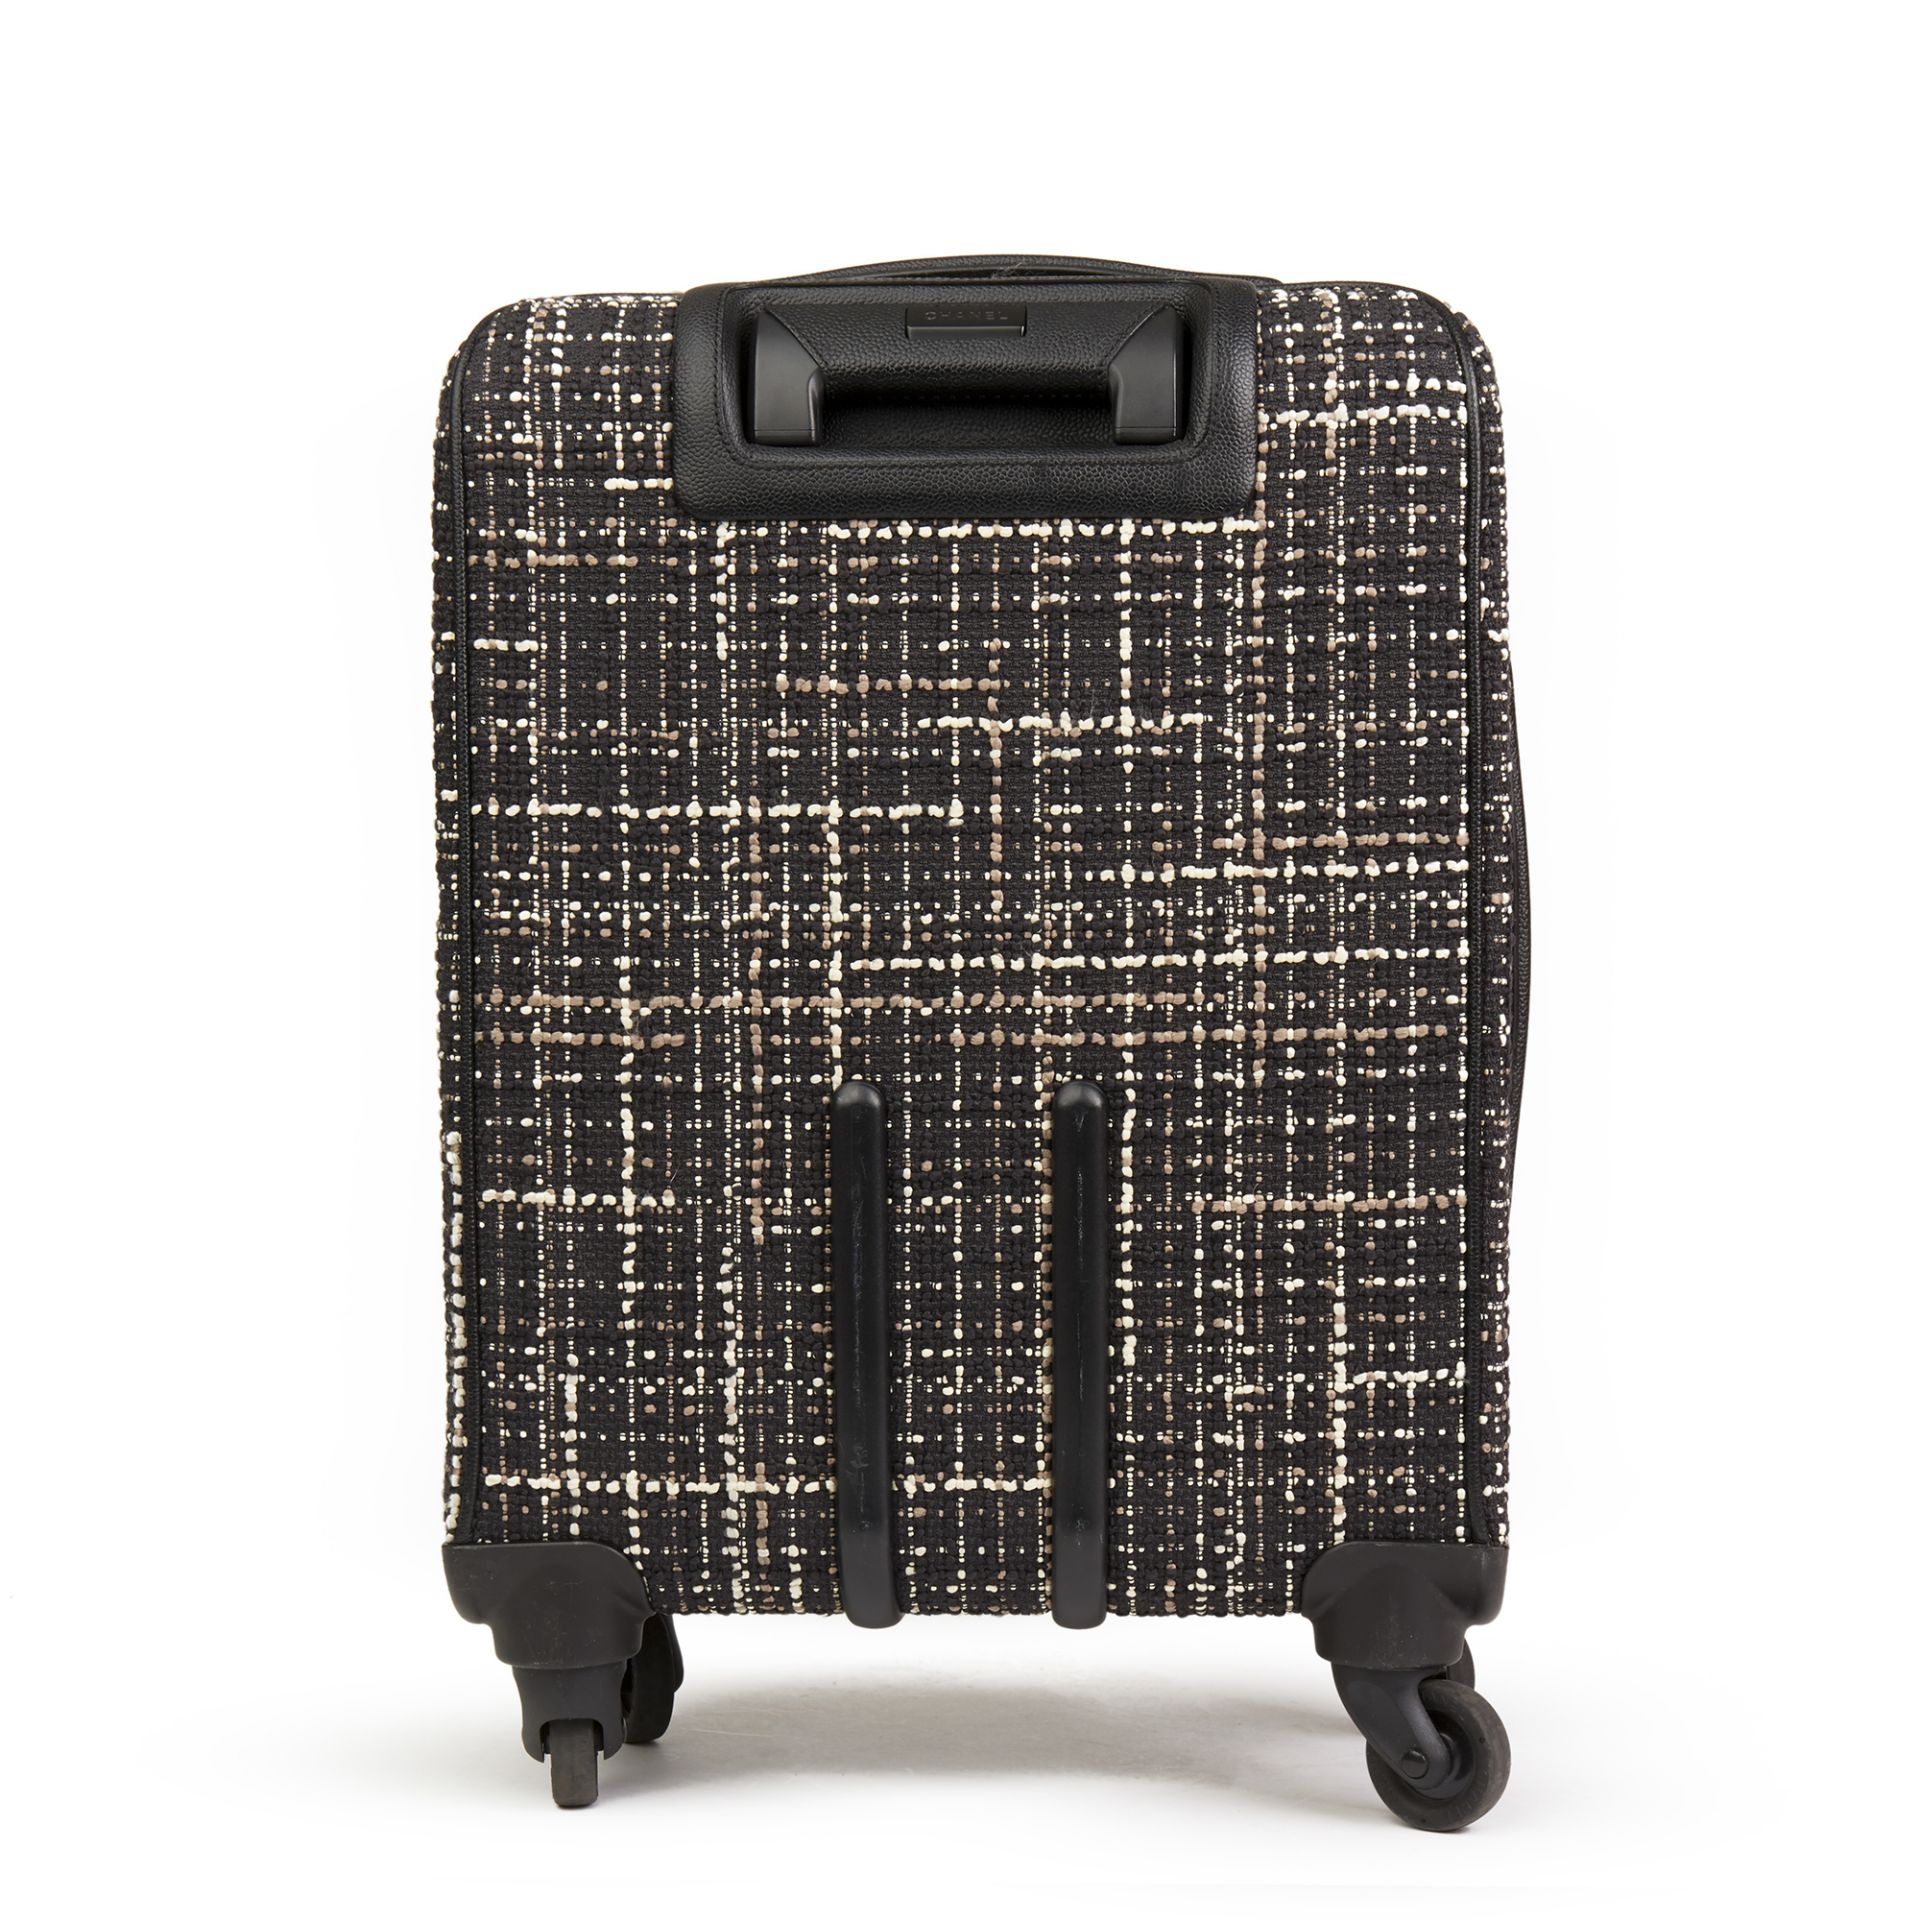 Chanel Jacket Trolley Rolling Suitcase - Image 12 of 13